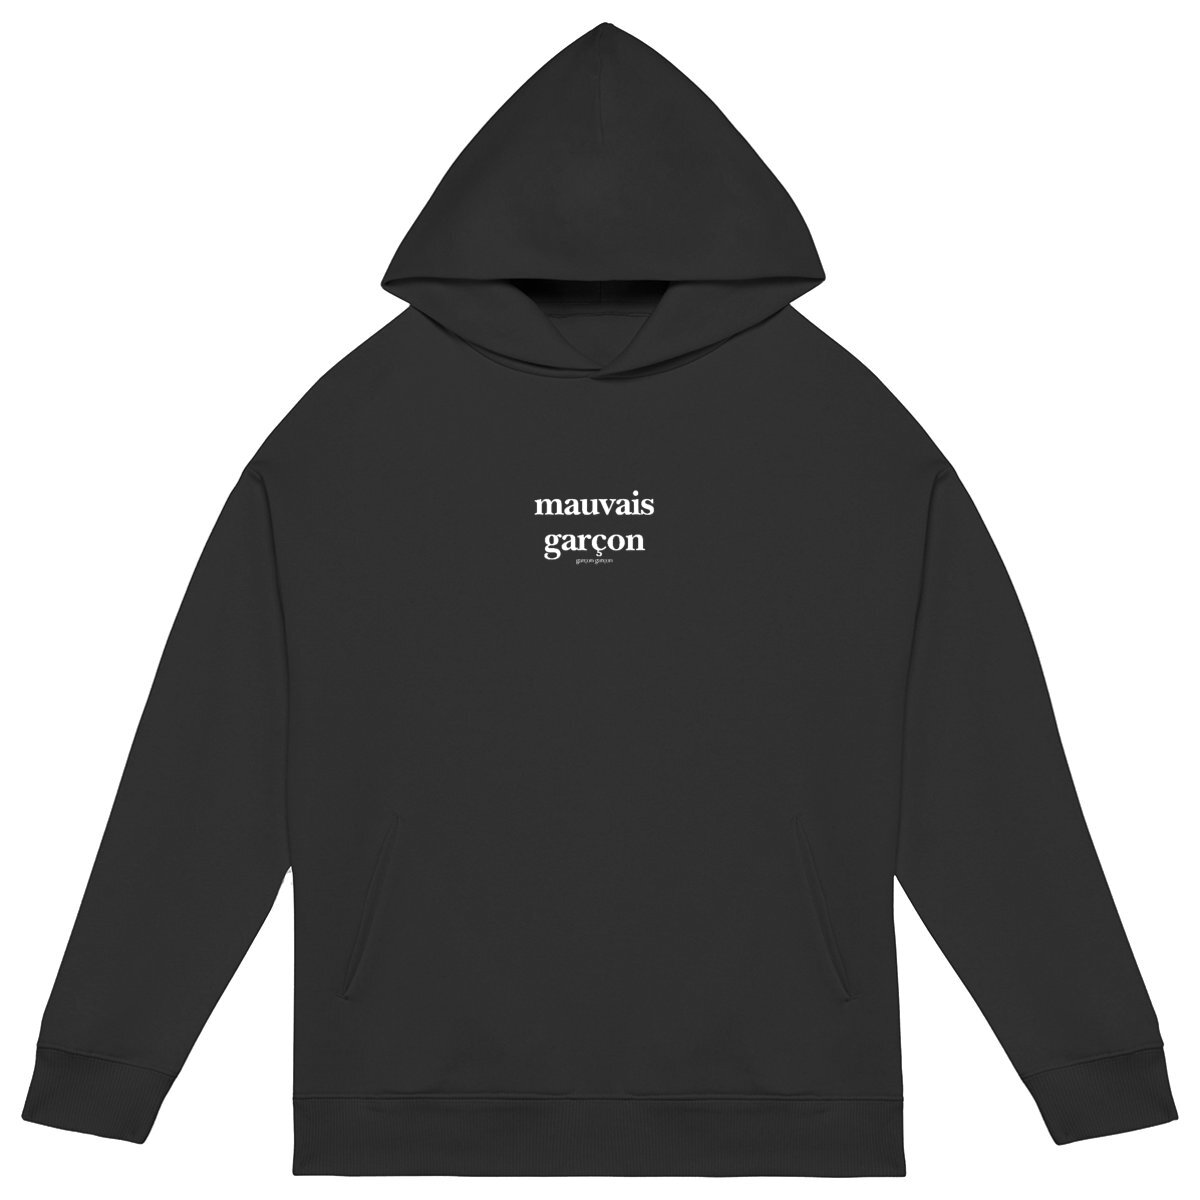 mauvais garçon hoodie over. garçon garçon essentiel oversized hoodie. Sleek in black and whispering Parisian chic, this hoodie is the sartorial whisper of 'garçon garçon' — a statement of understated elegance. Perfect for those who carry a piece of Paris in their hearts and a touch of audacity on their sleeves.